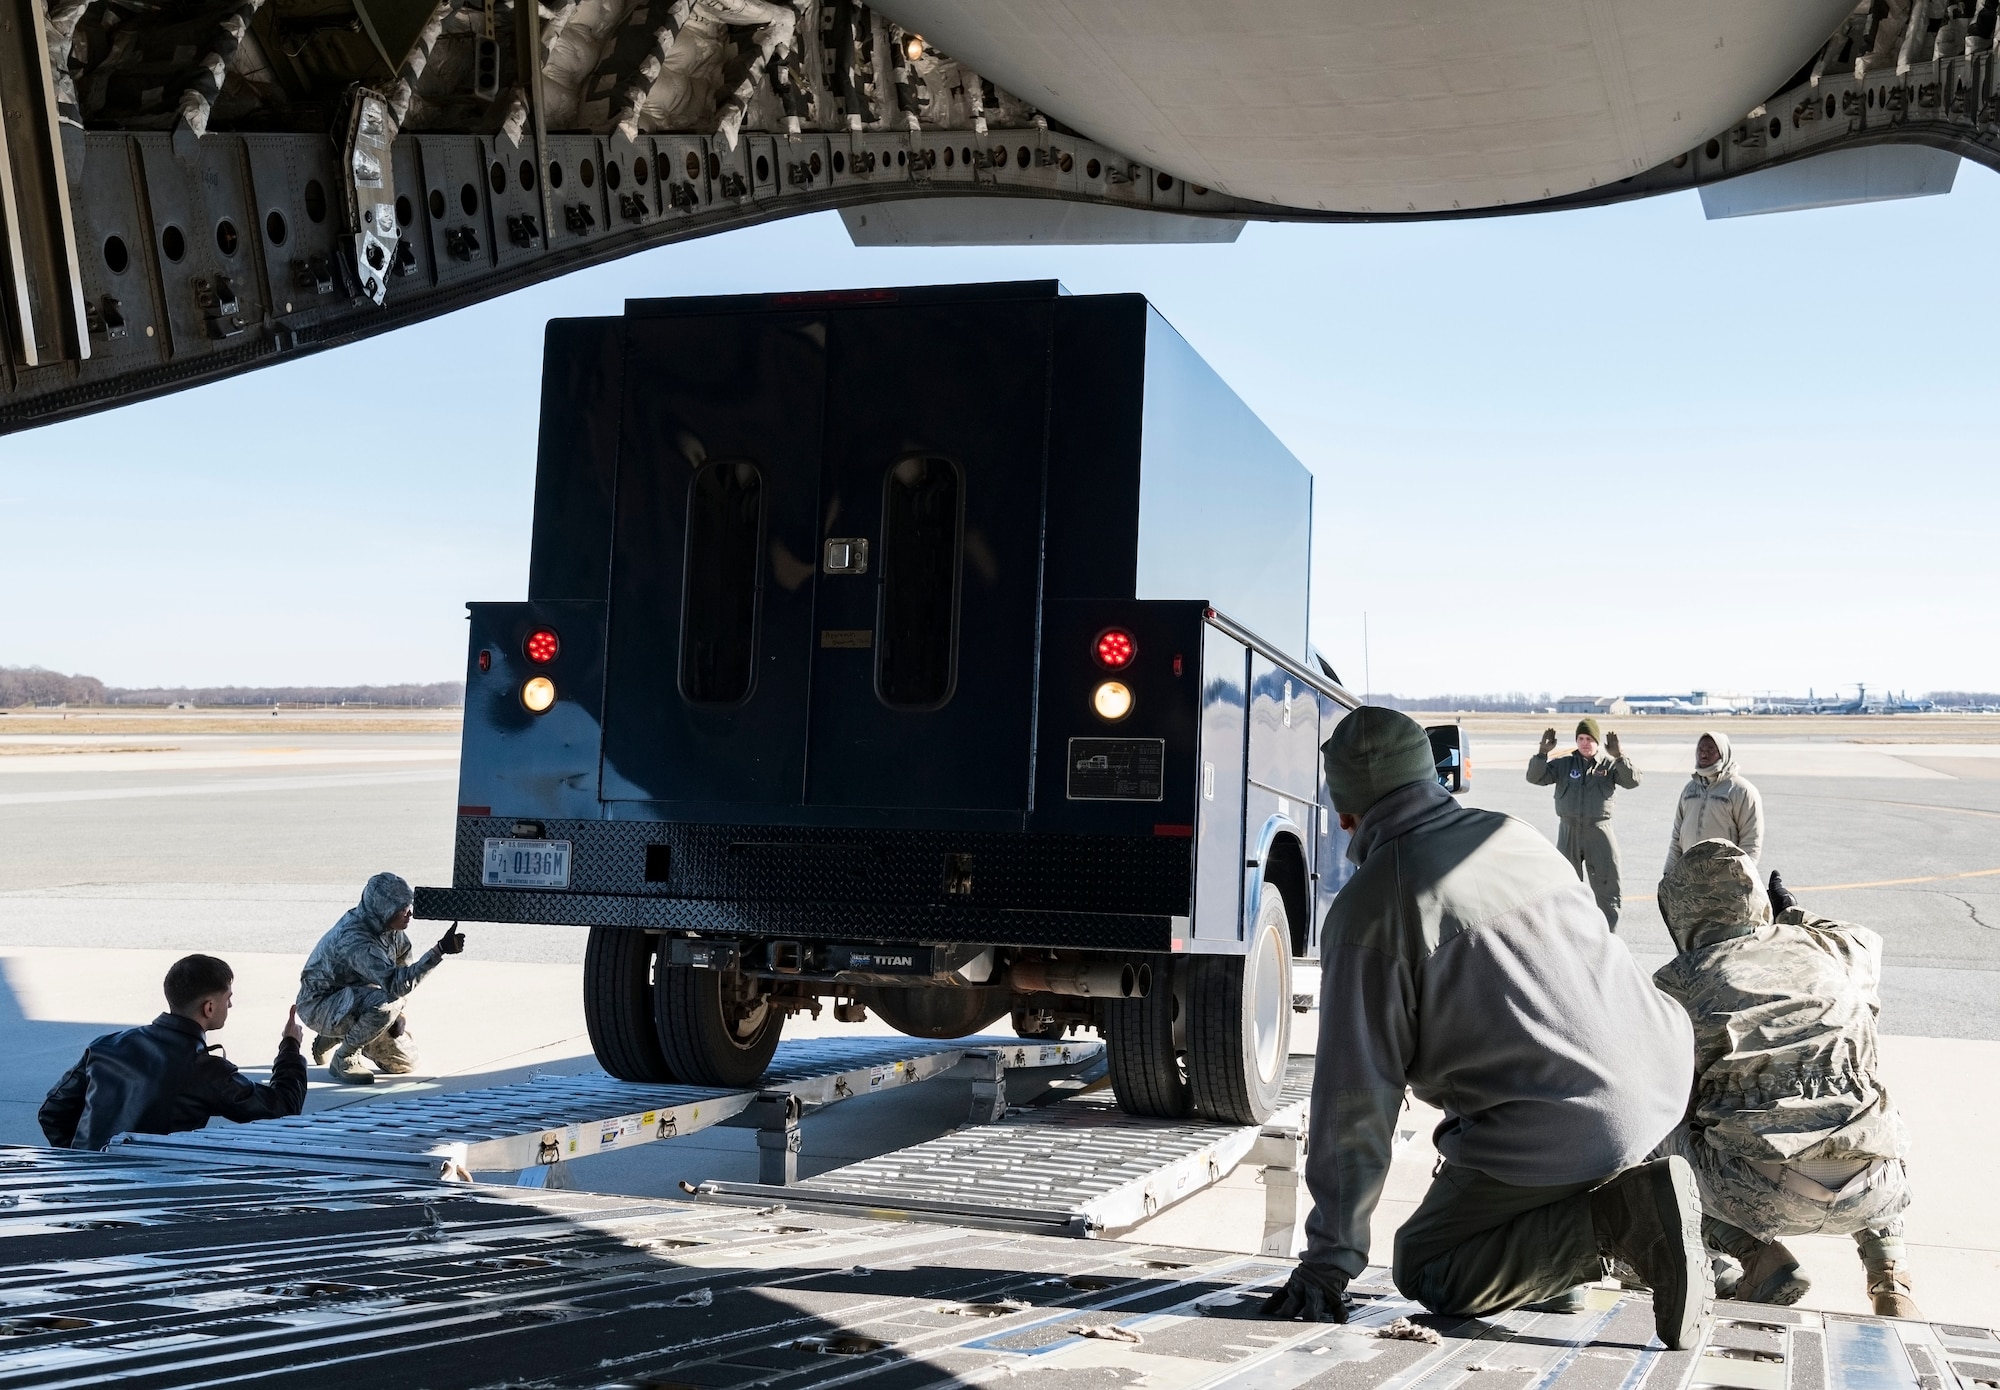 Ramp operations personnel assigned to the 436th Aerial Port Squadron along with 137th Airlift Squadron loadmasters from Stewart Air National Guard Base, Newburgh, N.Y., watch a vehicle back up onto a C-17 Globemaster III using the DOMOPS Airlift Modular Approach Shoring Jan. 11, 2019, at Dover Air Force Base, Del. The modular shoring was used to upload five vehicles belonging to the Delaware National Guard's 31st Civil Support Team, Weapons of Mass Destruction headquartered in Smyrna, Del. (U.S. Air Force photo by Roland Balik)